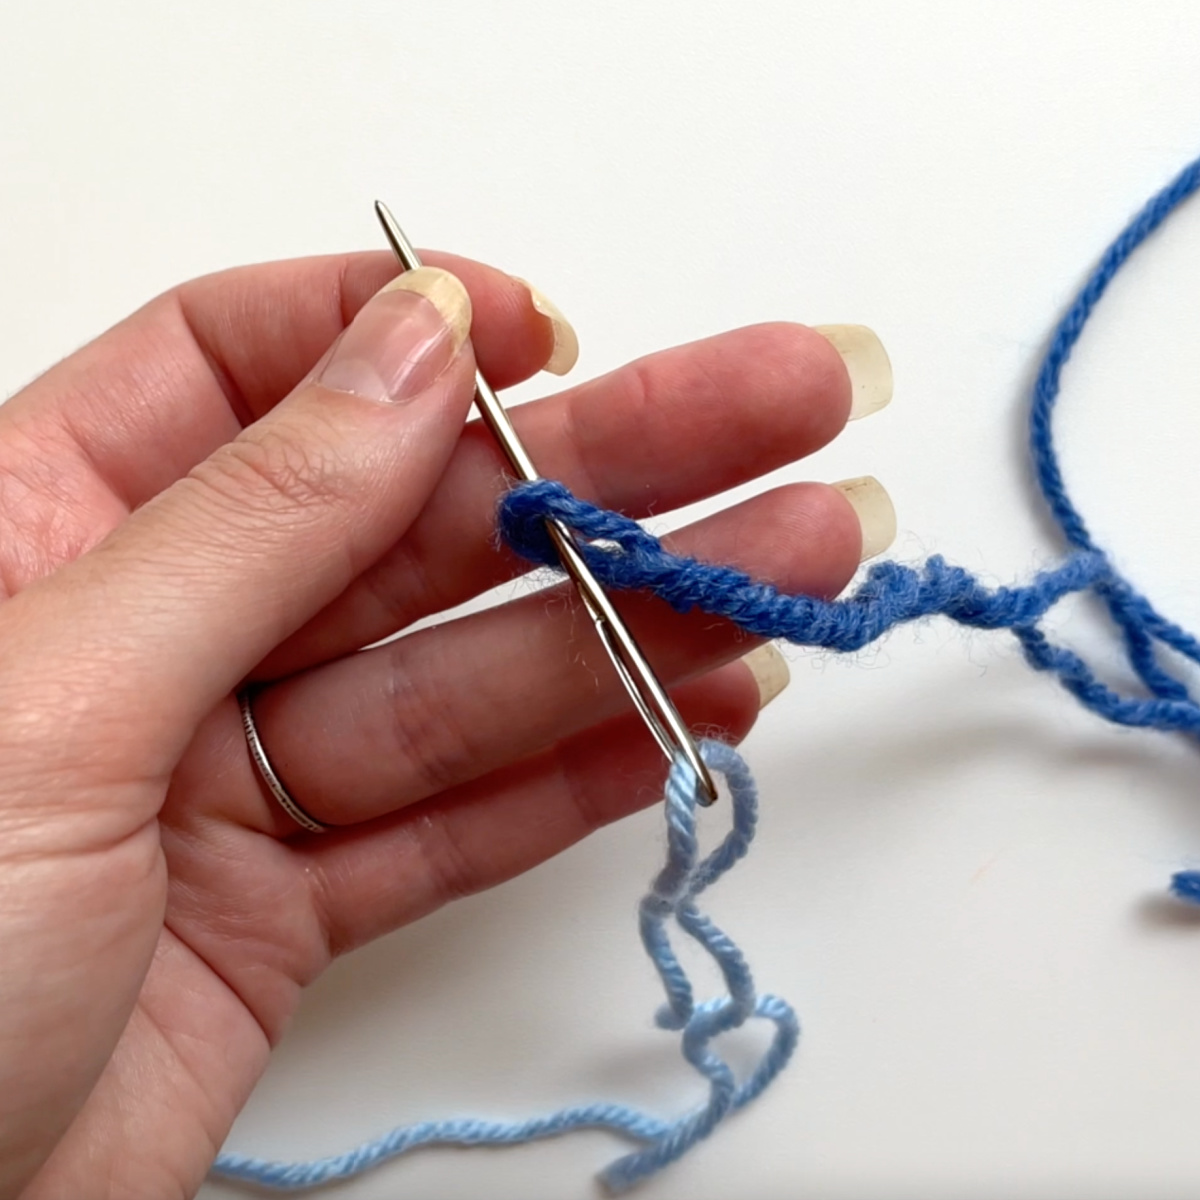 Thread the new yarn through the loop that you just made